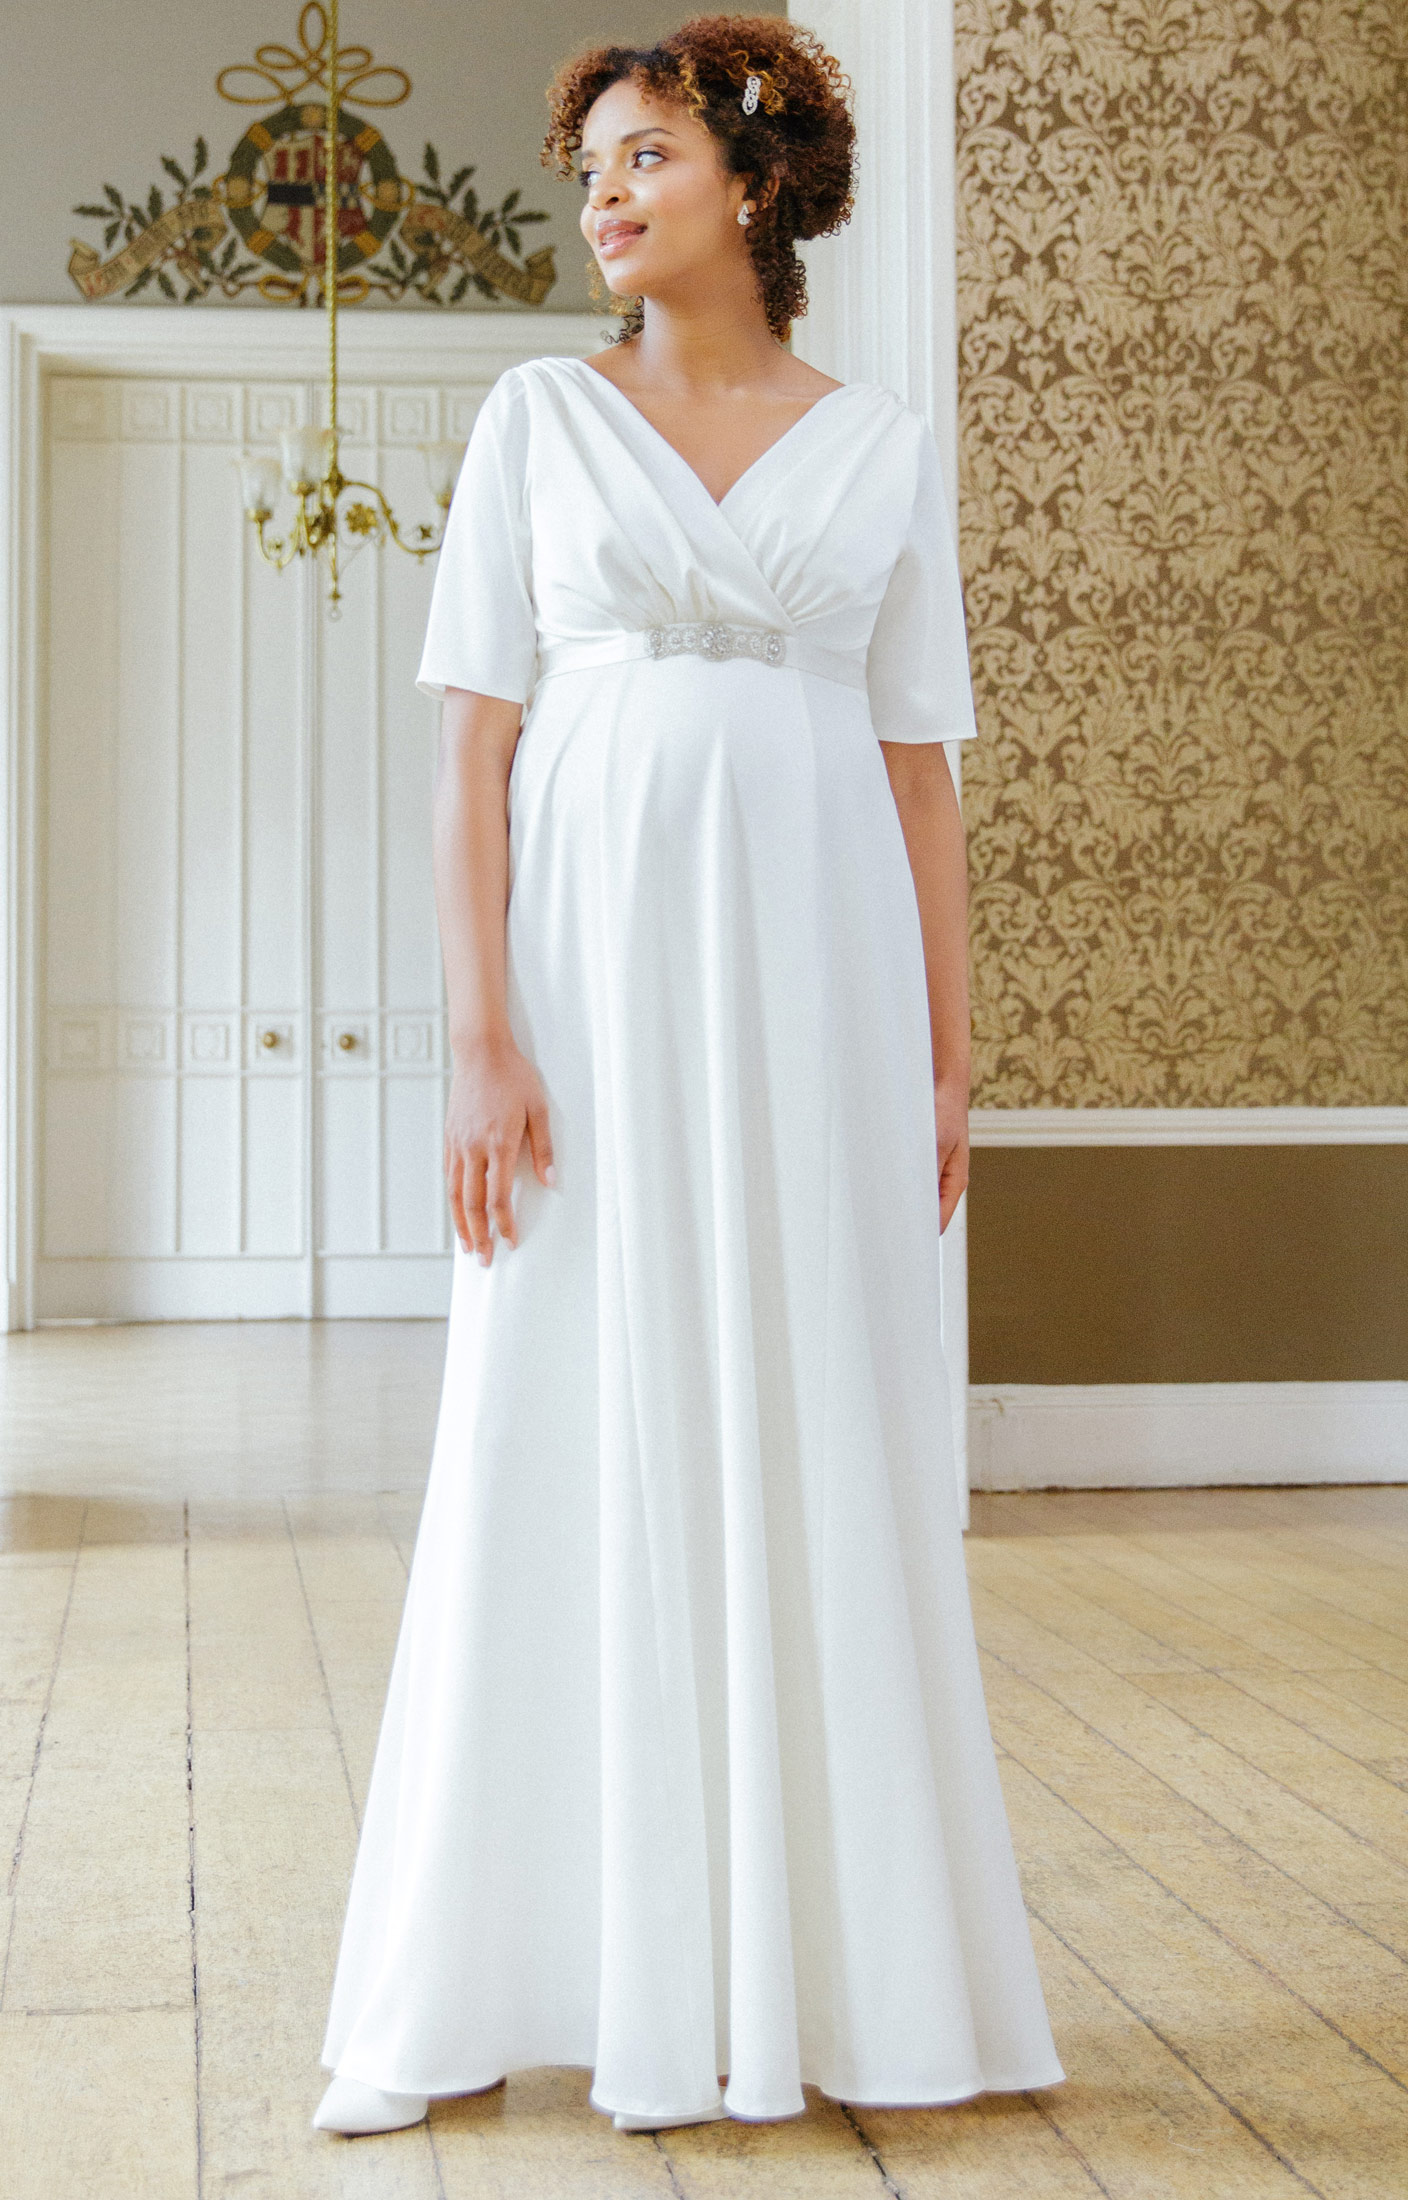 Stænke Forinden obligatorisk Zoey Maternity Wedding Gown Satin Ivory - Maternity Wedding Dresses, Evening  Wear and Party Clothes by Tiffany Rose US